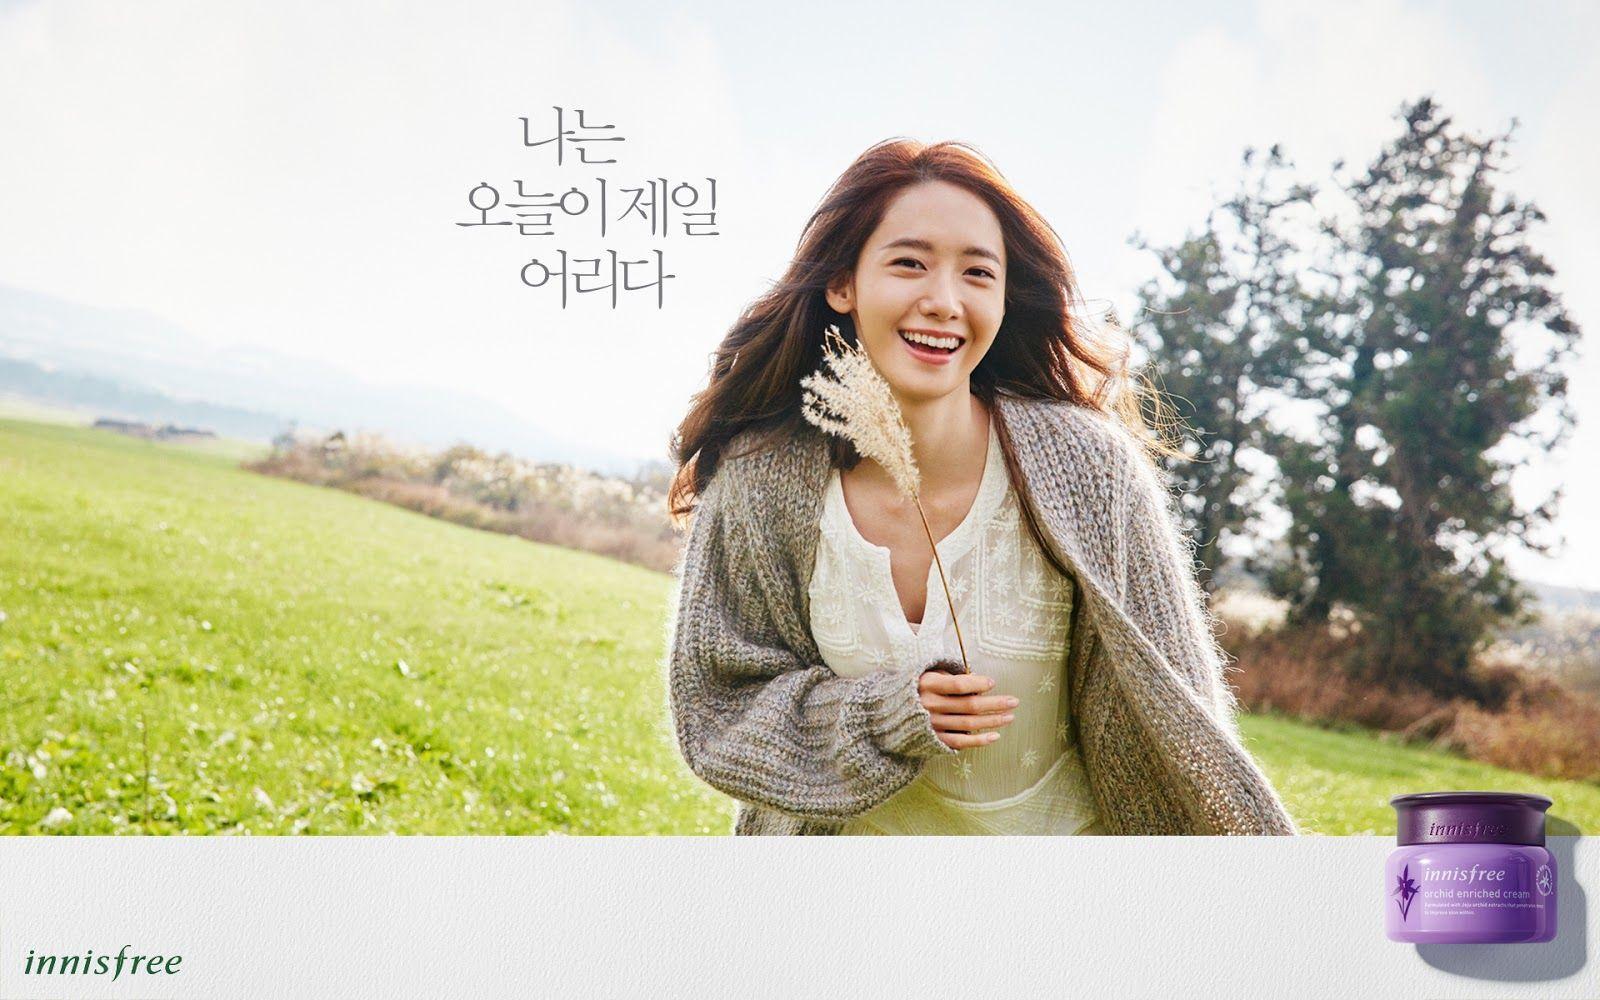 Yoona innisfree 「ORCHID ENRICHED CREAM」 2016 Promotion Wallpaper